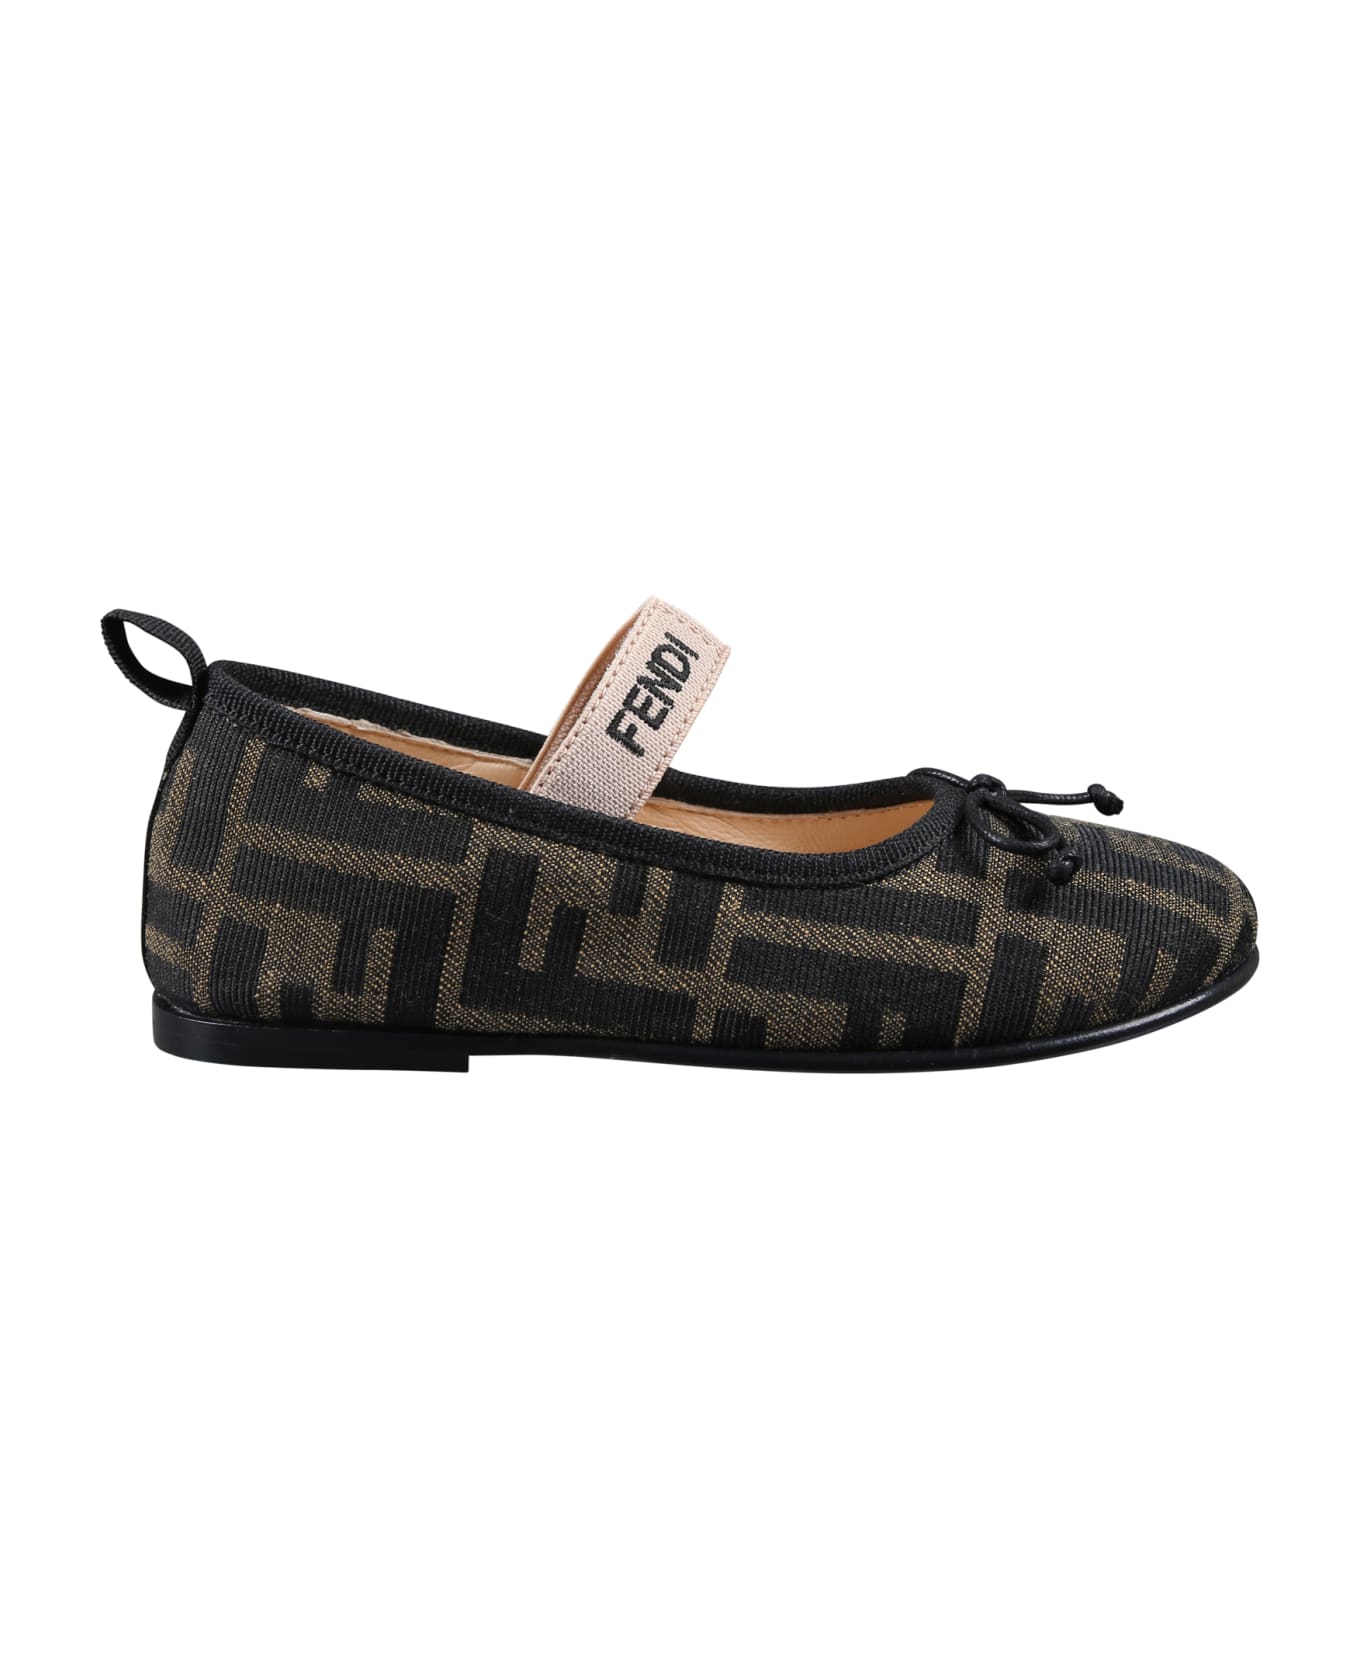 Fendi Ballet Flats For Girl With All-over Ff Logo - Brown シューズ